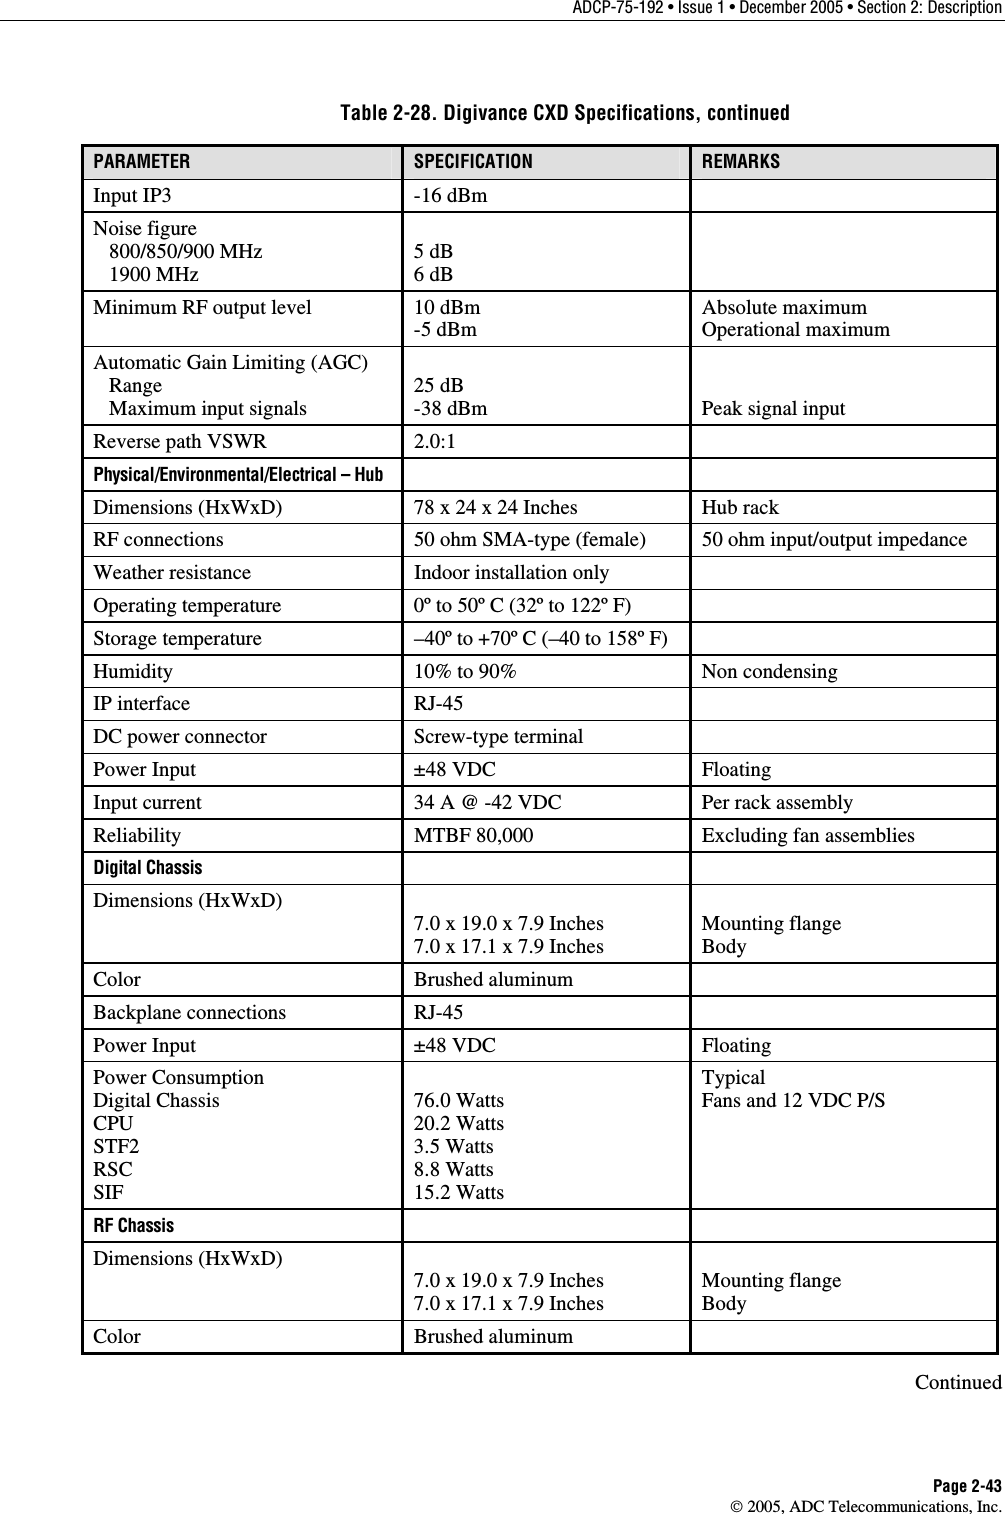 ADCP-75-192 • Issue 1 • December 2005 • Section 2: Description Page 2-43  2005, ADC Telecommunications, Inc. Table 2-28. Digivance CXD Specifications, continued PARAMETER  SPECIFICATION  REMARKS Input IP3 -16 dBm  Noise figure    800/850/900 MHz    1900 MHz  5 dB 6 dB  Minimum RF output level  10 dBm  -5 dBm Absolute maximum Operational maximum Automatic Gain Limiting (AGC)    Range    Maximum input signals  25 dB -38 dBm   Peak signal input Reverse path VSWR  2.0:1   Physical/Environmental/Electrical – Hub    Dimensions (HxWxD)  78 x 24 x 24 Inches  Hub rack  RF connections  50 ohm SMA-type (female)  50 ohm input/output impedance Weather resistance  Indoor installation only   Operating temperature  0º to 50º C (32º to 122º F)   Storage temperature  –40º to +70º C (–40 to 158º F)   Humidity  10% to 90%  Non condensing IP interface  RJ-45   DC power connector  Screw-type terminal   Power Input  ±48 VDC  Floating Input current  34 A @ -42 VDC  Per rack assembly Reliability  MTBF 80,000  Excluding fan assemblies Digital Chassis    Dimensions (HxWxD)   7.0 x 19.0 x 7.9 Inches 7.0 x 17.1 x 7.9 Inches  Mounting flange Body Color Brushed aluminum  Backplane connections  RJ-45   Power Input  ±48 VDC  Floating Power Consumption Digital Chassis CPU STF2 RSC SIF  76.0 Watts 20.2 Watts 3.5 Watts 8.8 Watts 15.2 Watts Typical Fans and 12 VDC P/S RF Chassis    Dimensions (HxWxD)  7.0 x 19.0 x 7.9 Inches 7.0 x 17.1 x 7.9 Inches  Mounting flange Body Color Brushed aluminum  Continued 